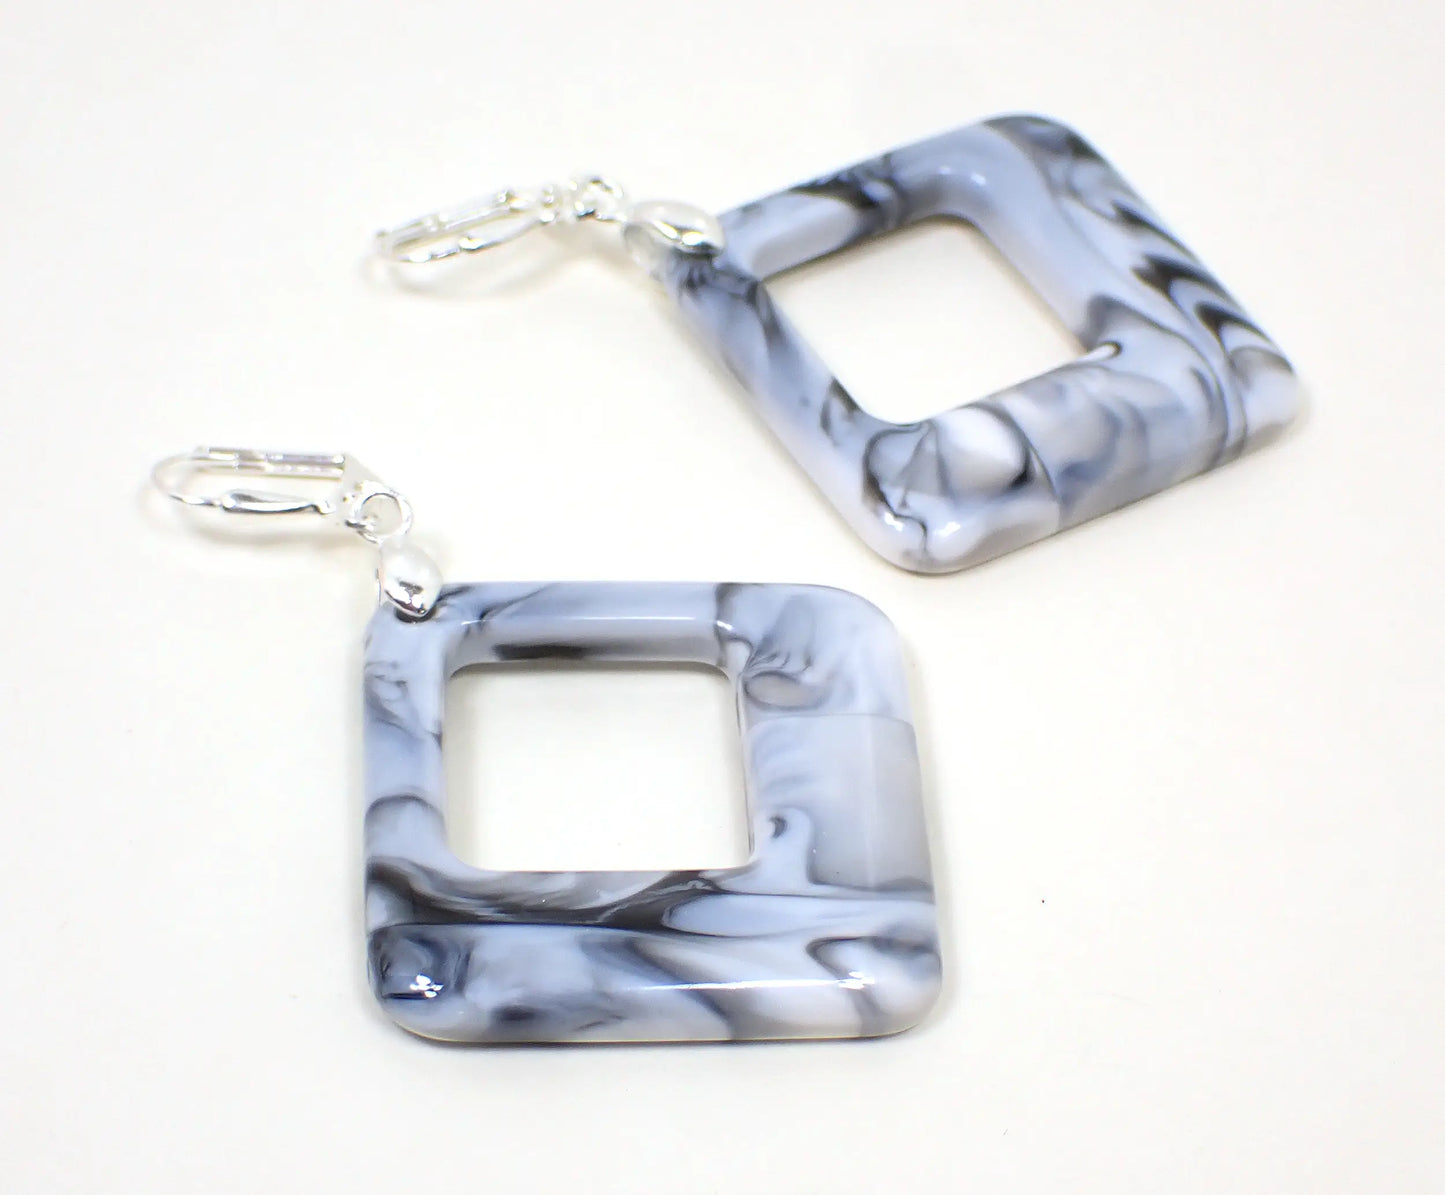 Darker Marbled White Black Gray Acrylic Handmade Diagonal Drop Earrings, Silver Plated Hook Lever Back or Clip On